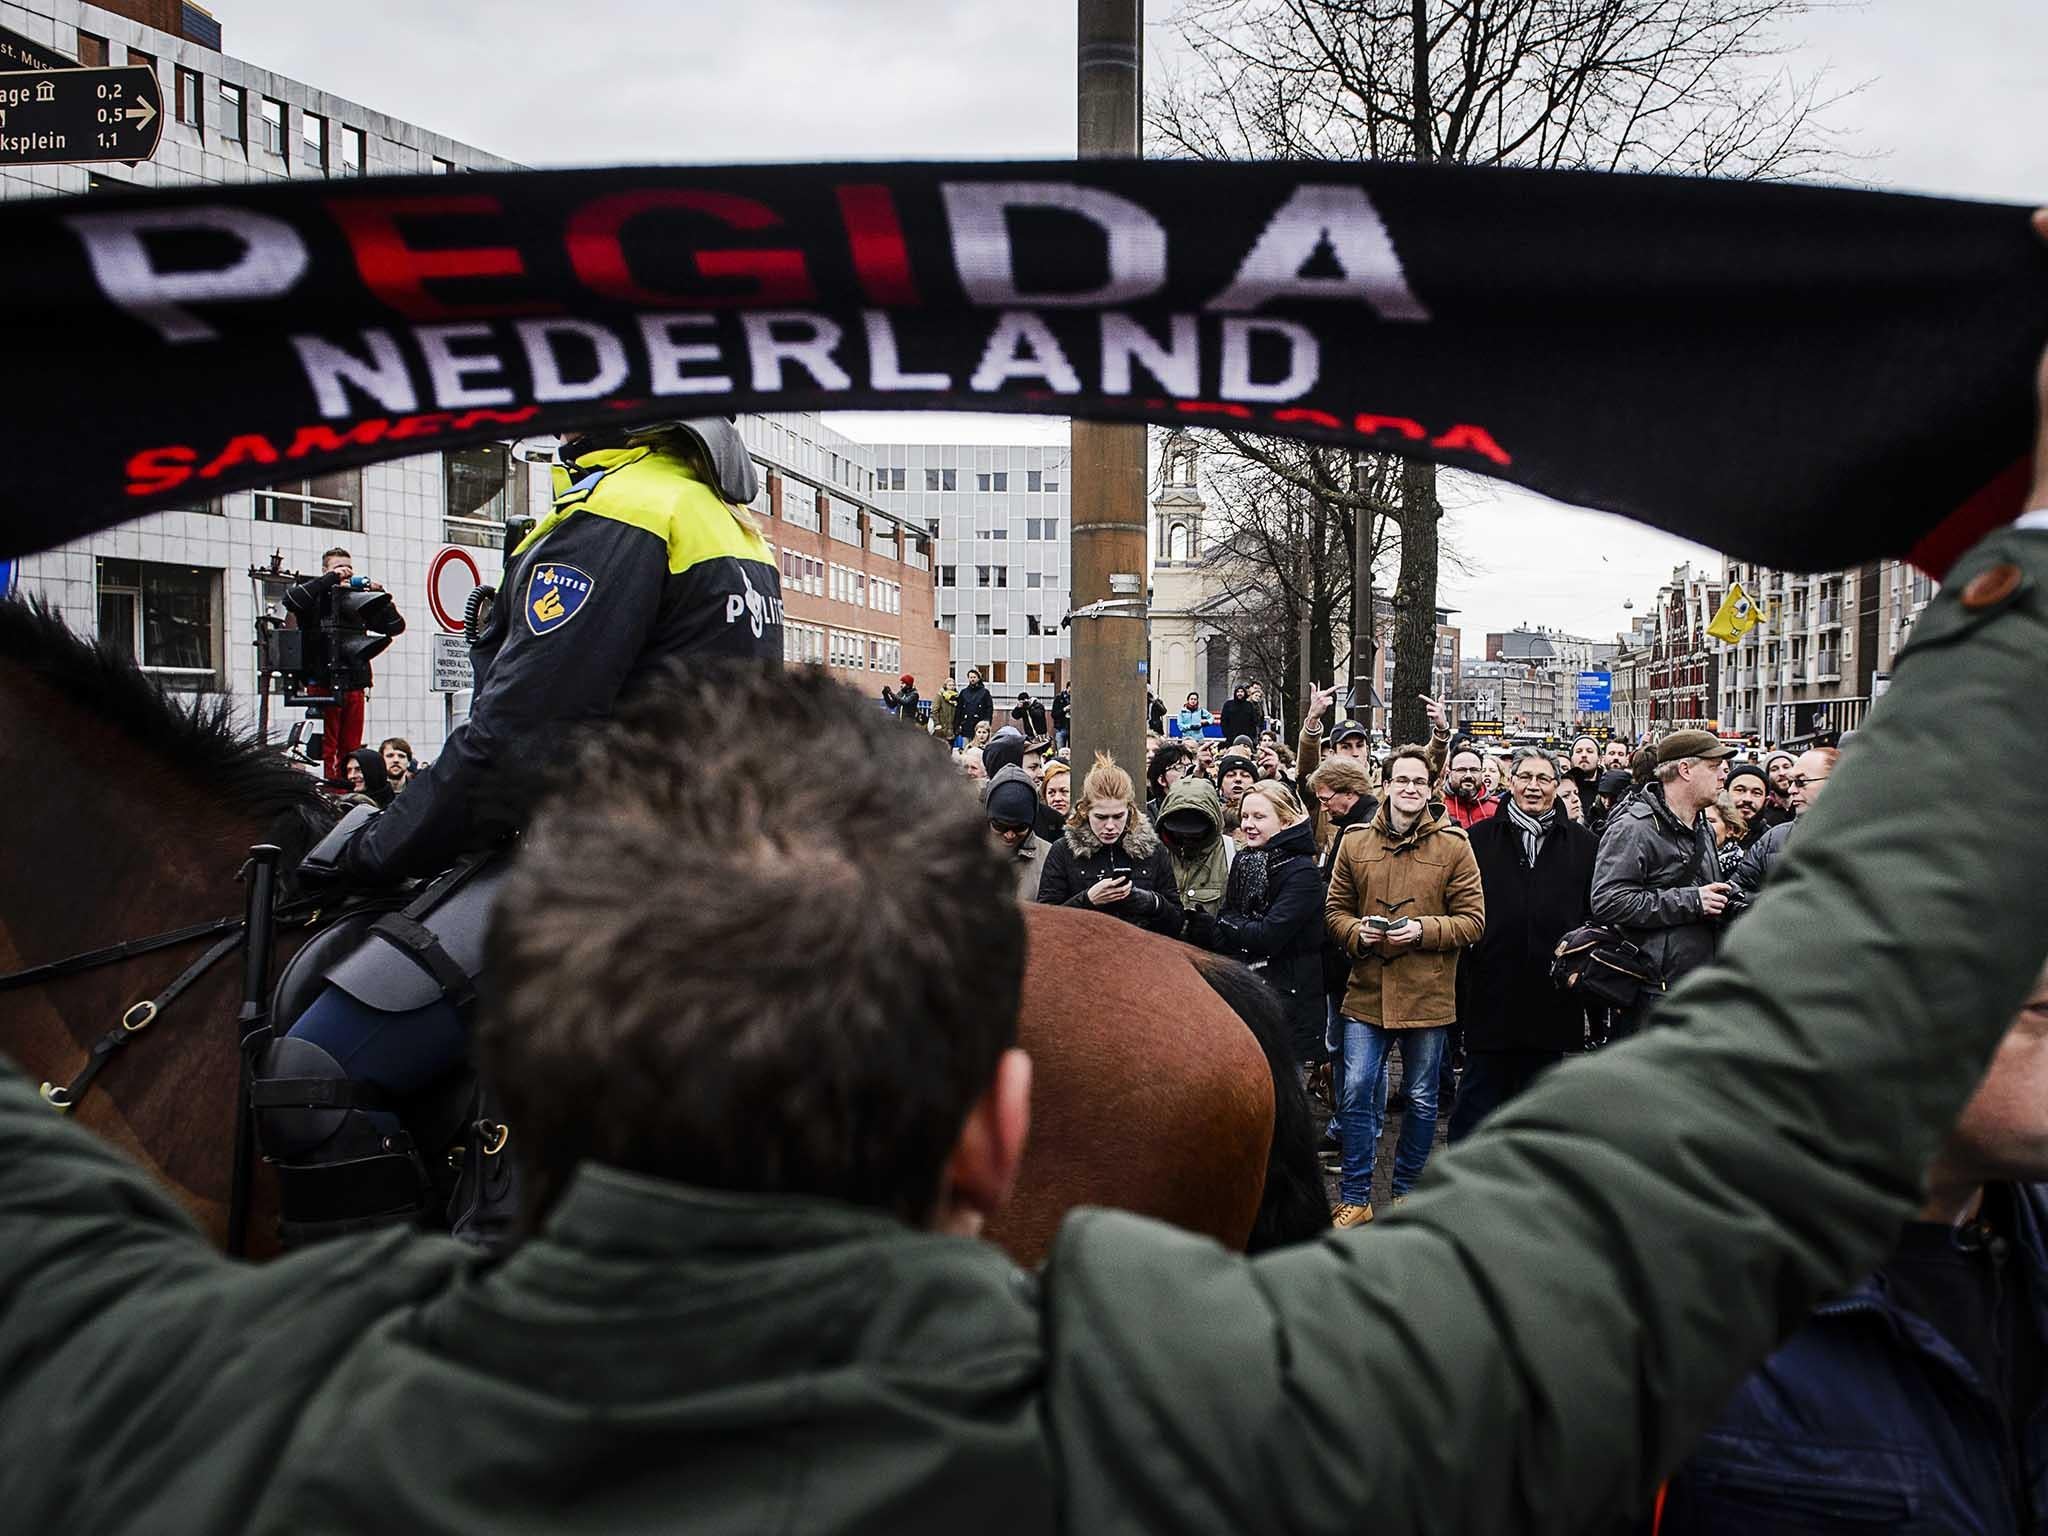 Members of Pegida face counter-protesters during a demonstration in central Amsterdam